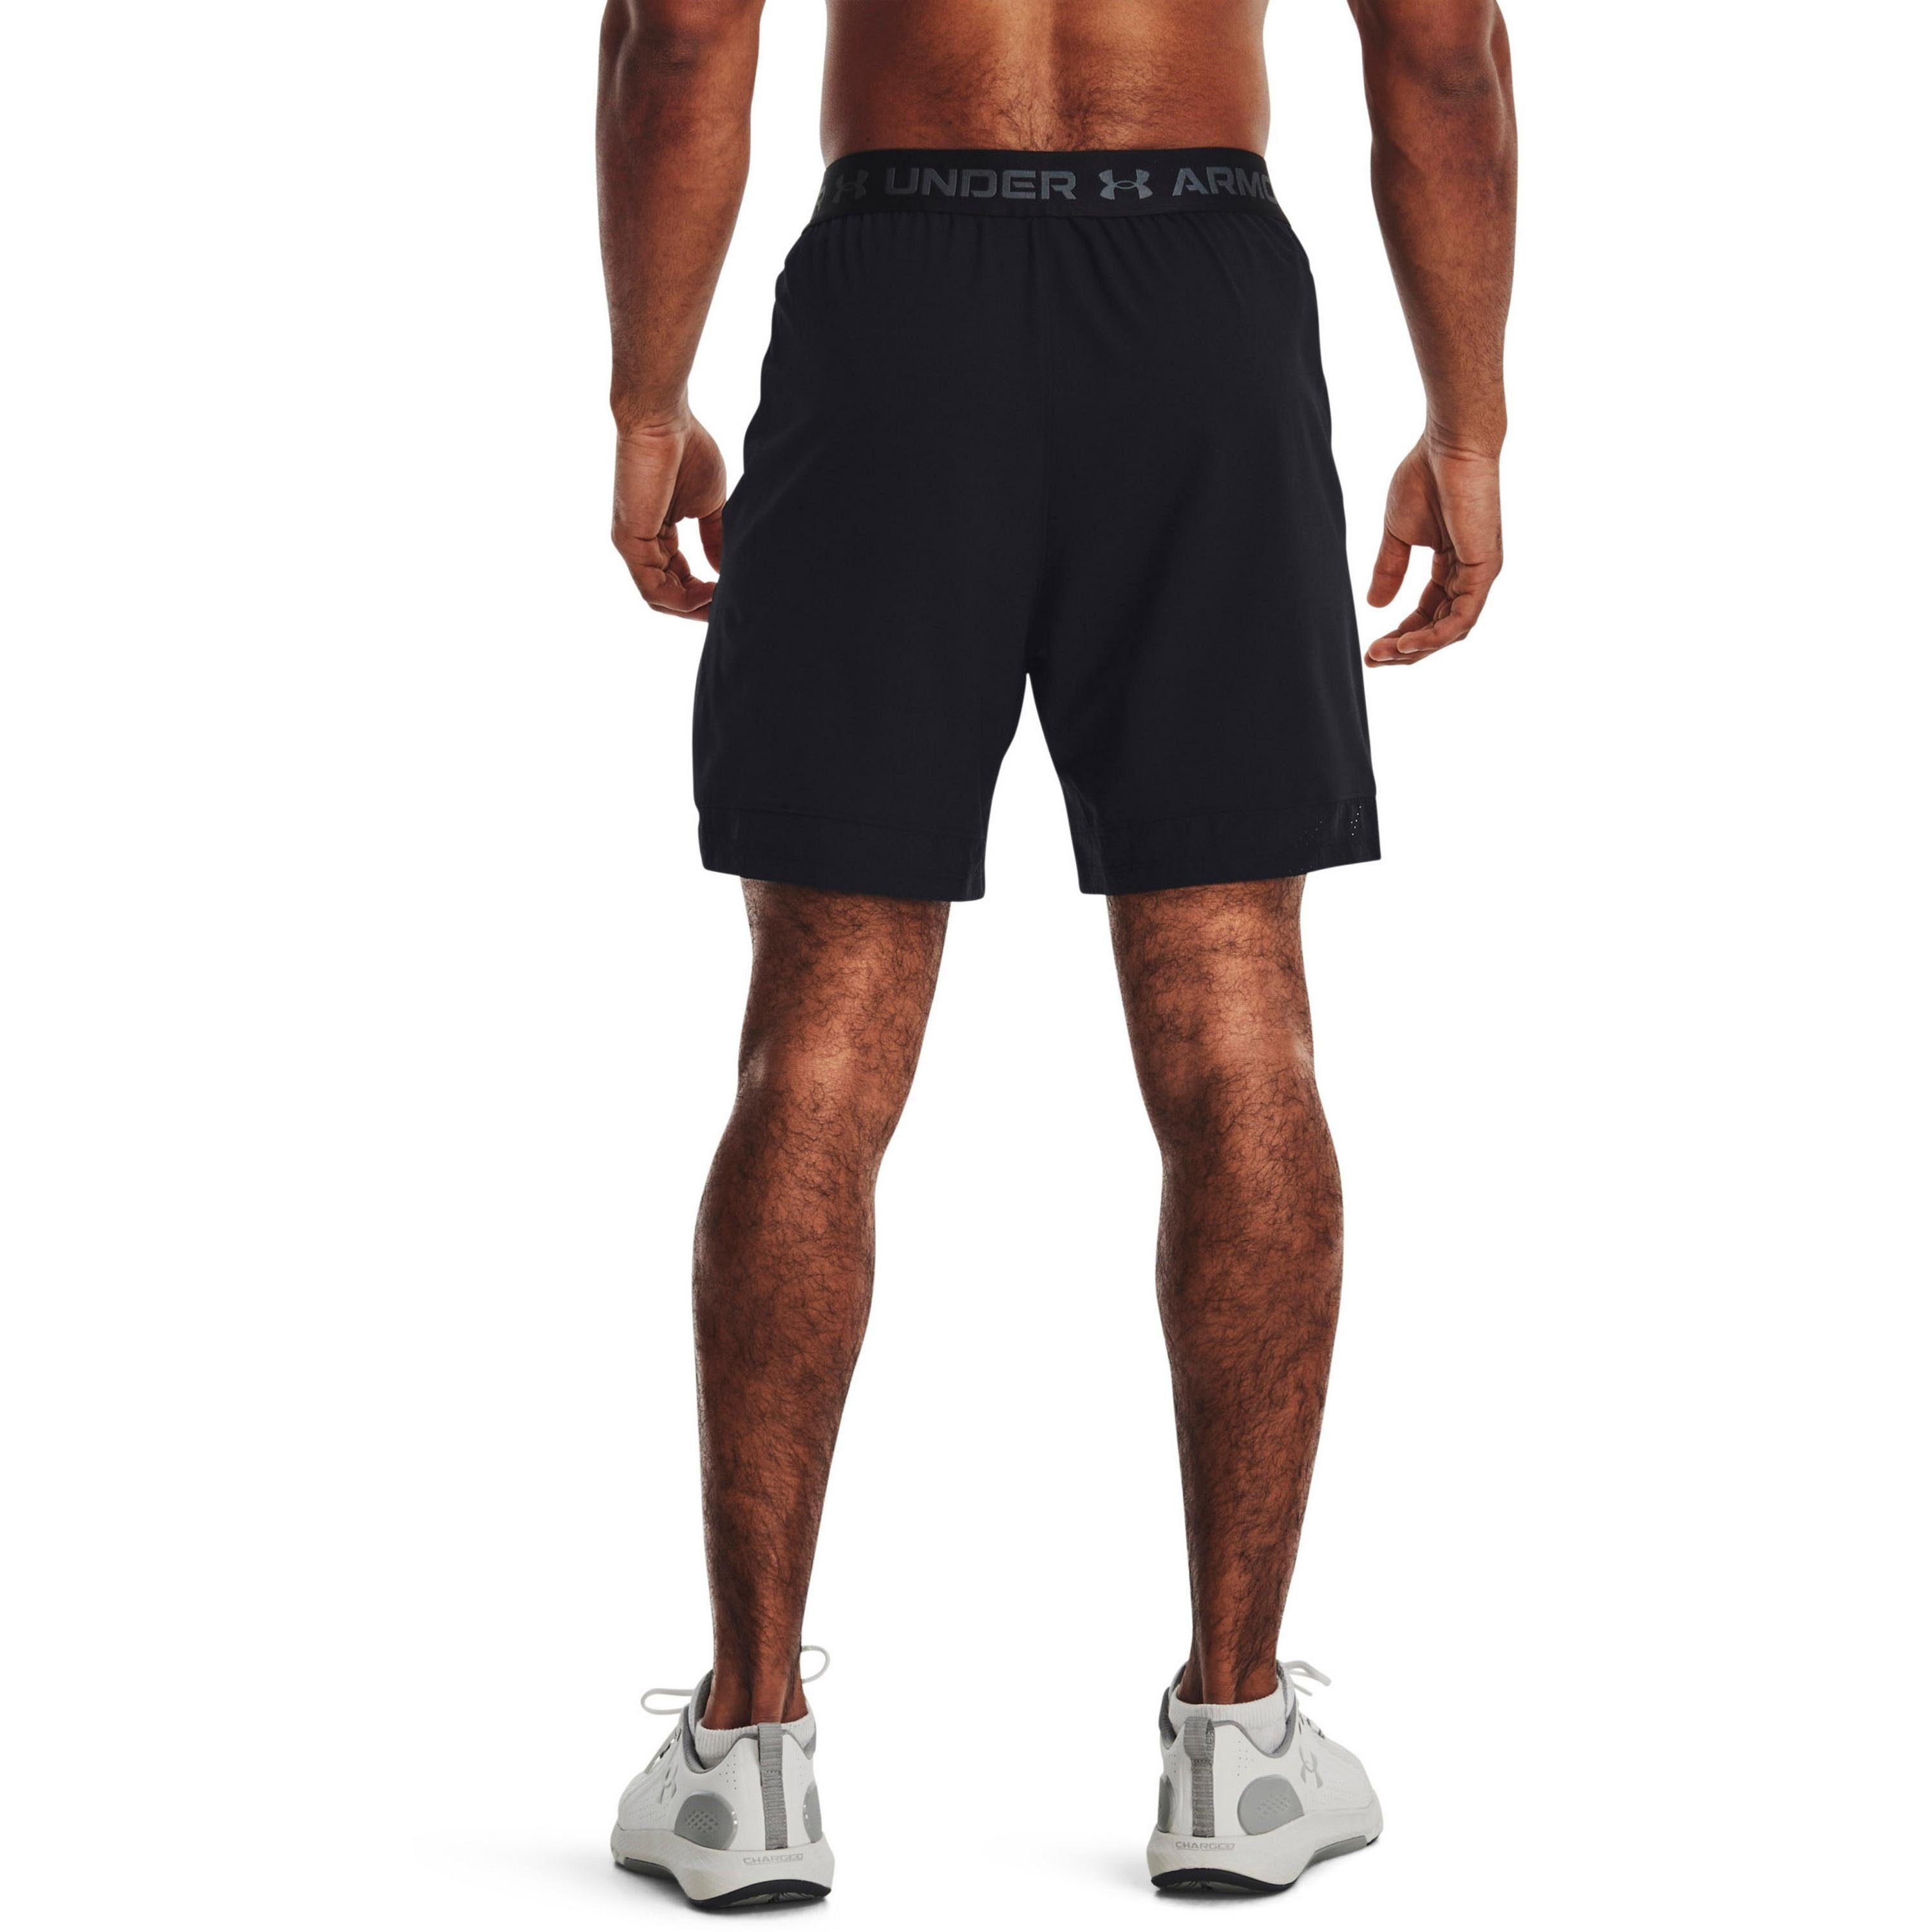 Under Armour® Funktionsshorts Vanish black-pitch gray